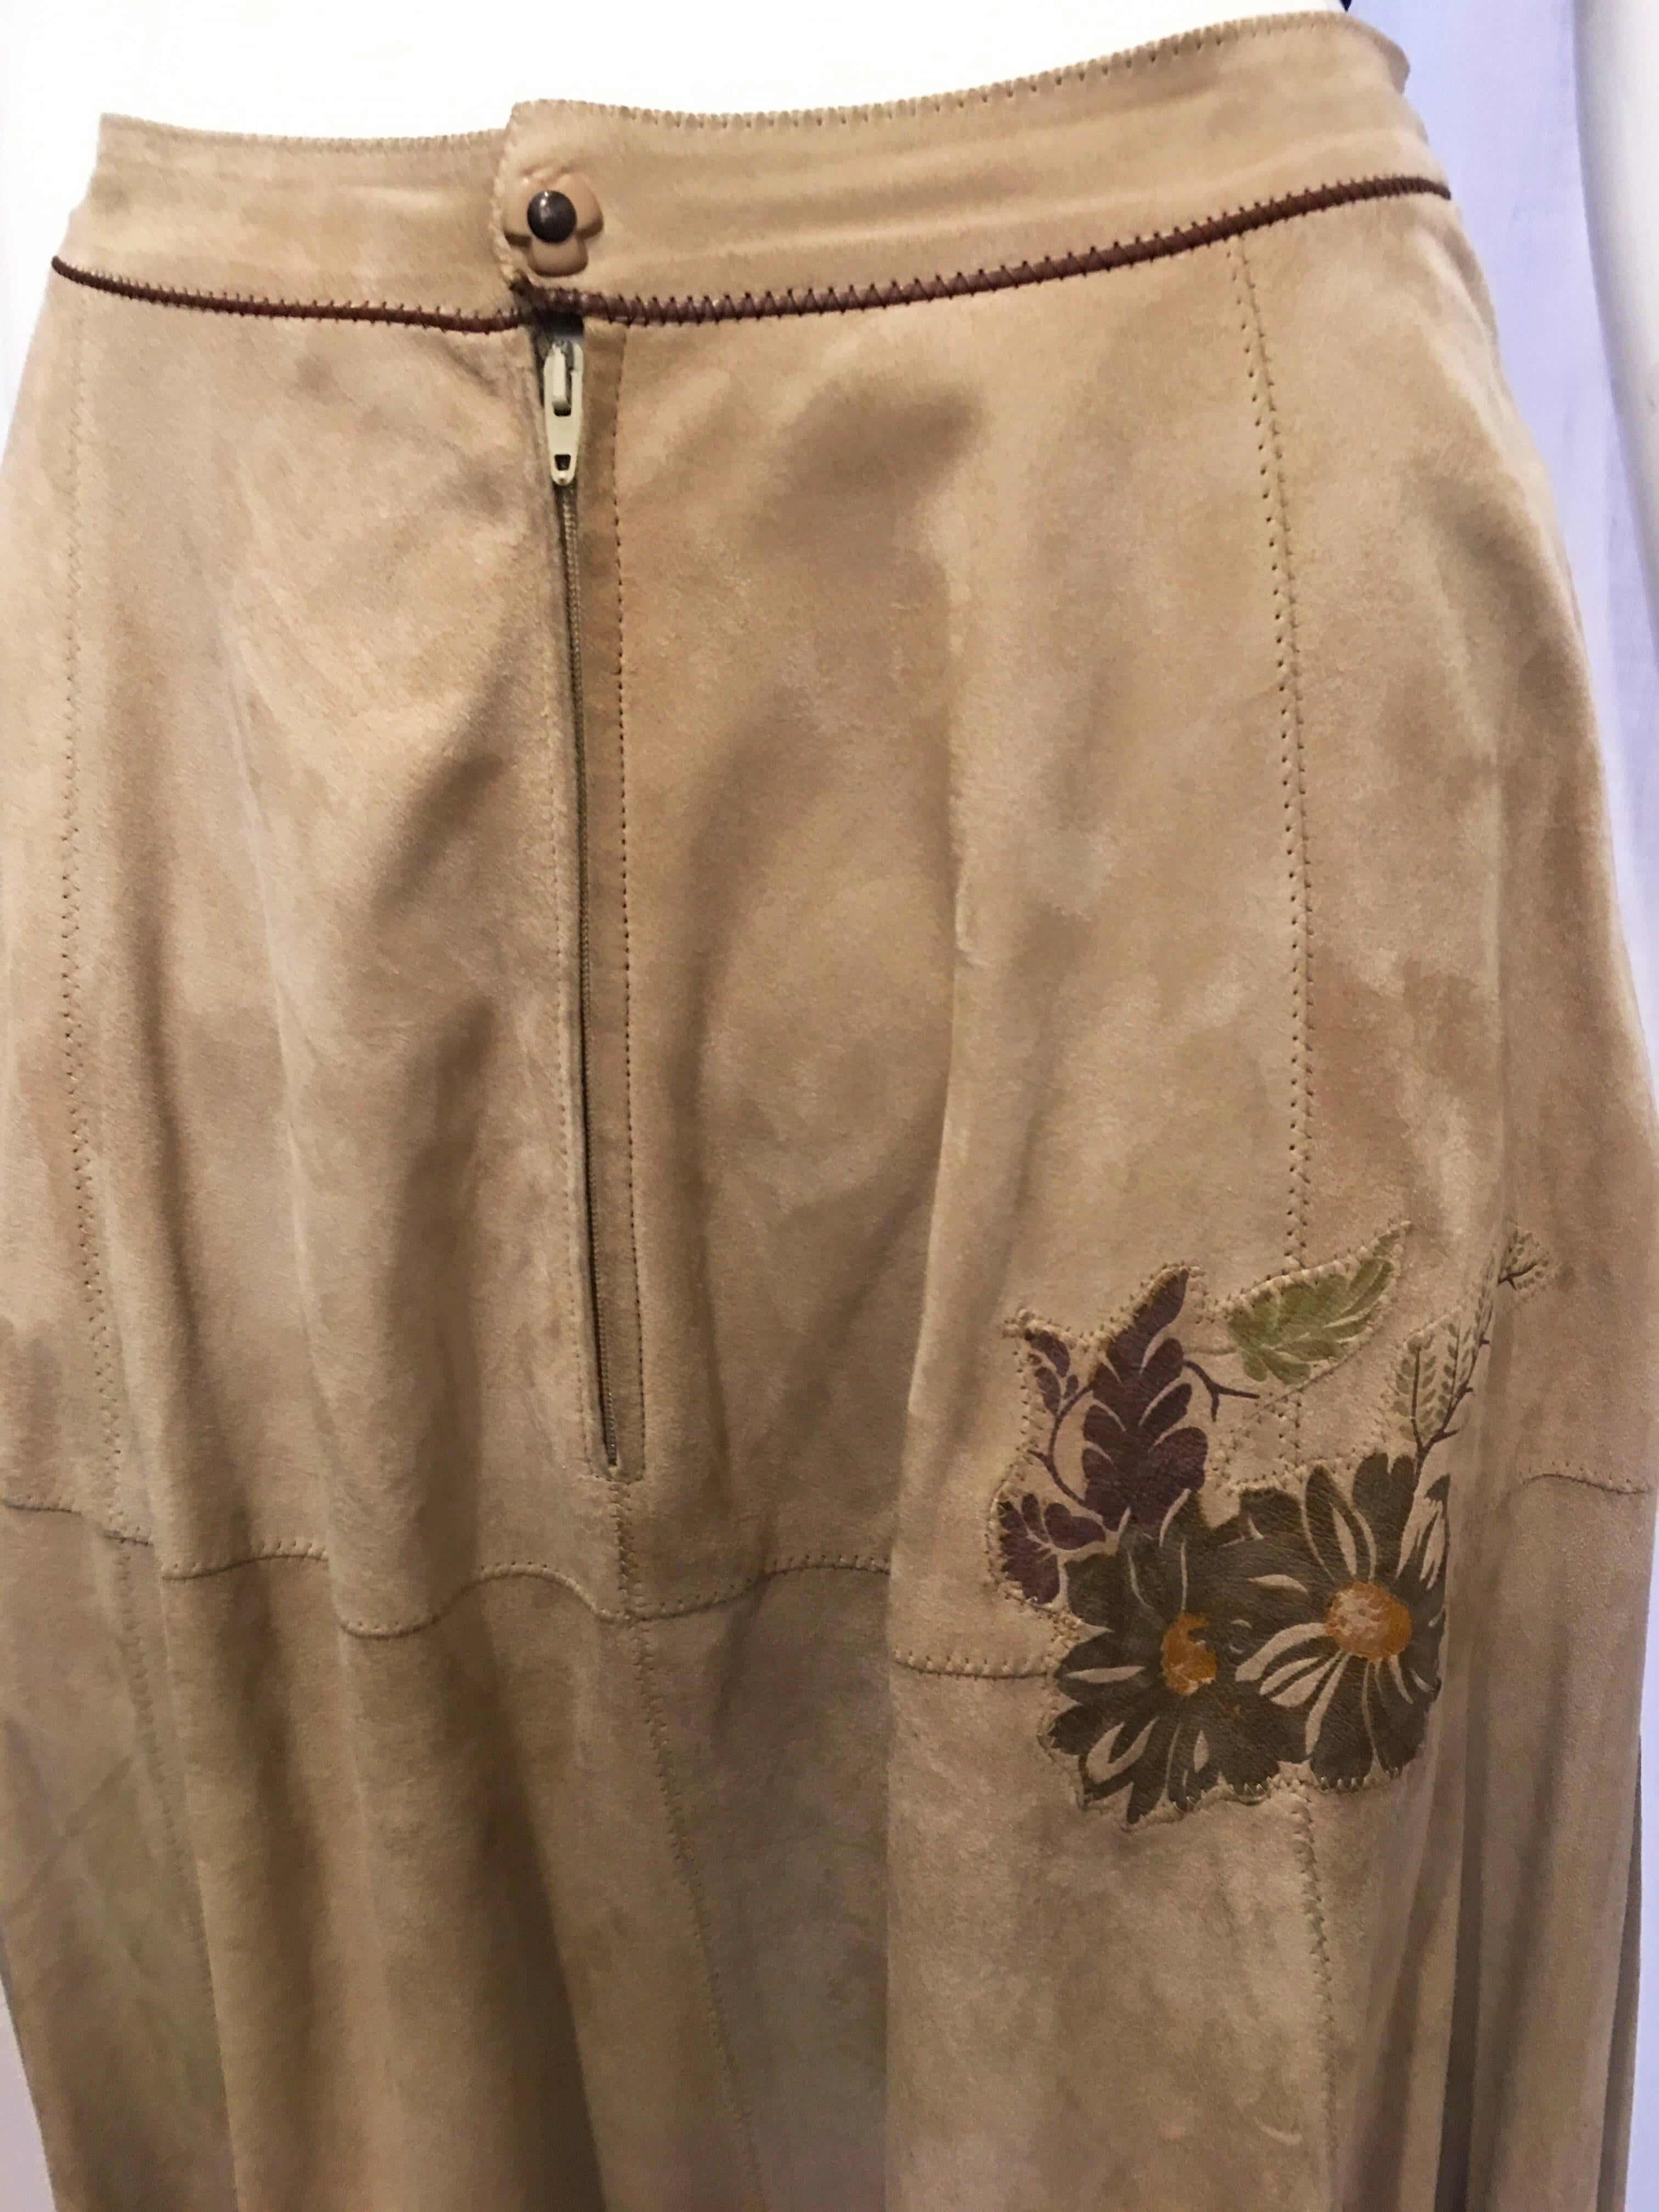 Roberto Cavalli Floral Suede Skirt, 1970s  In Excellent Condition For Sale In Brooklyn, NY